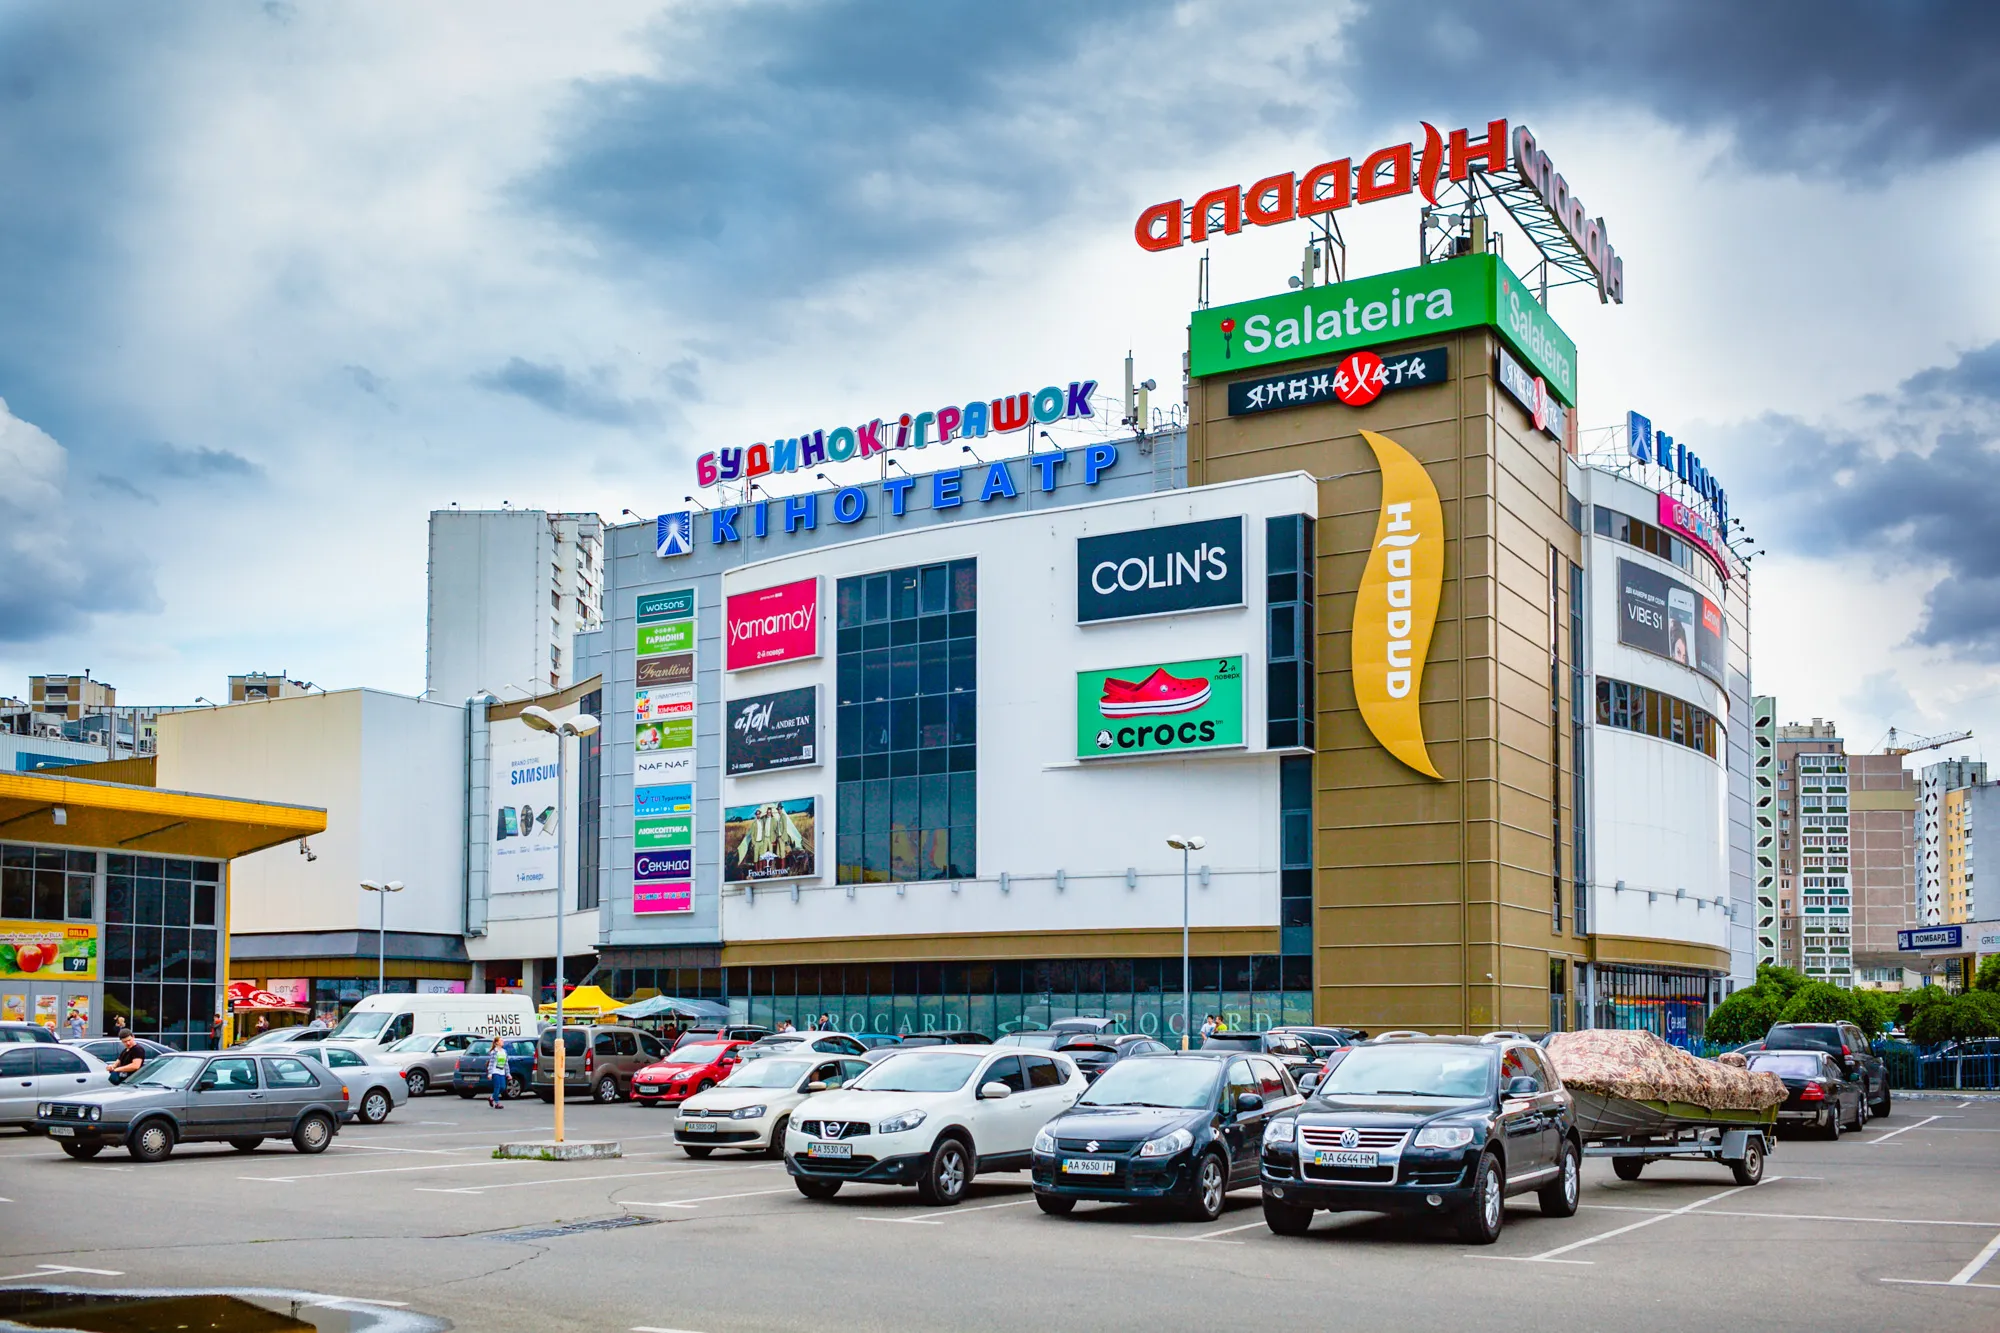 Shopping Mall Aladdin in Ukraine, europe | Handbags,Shoes,Clothes,Cosmetics,Sportswear - Country Helper